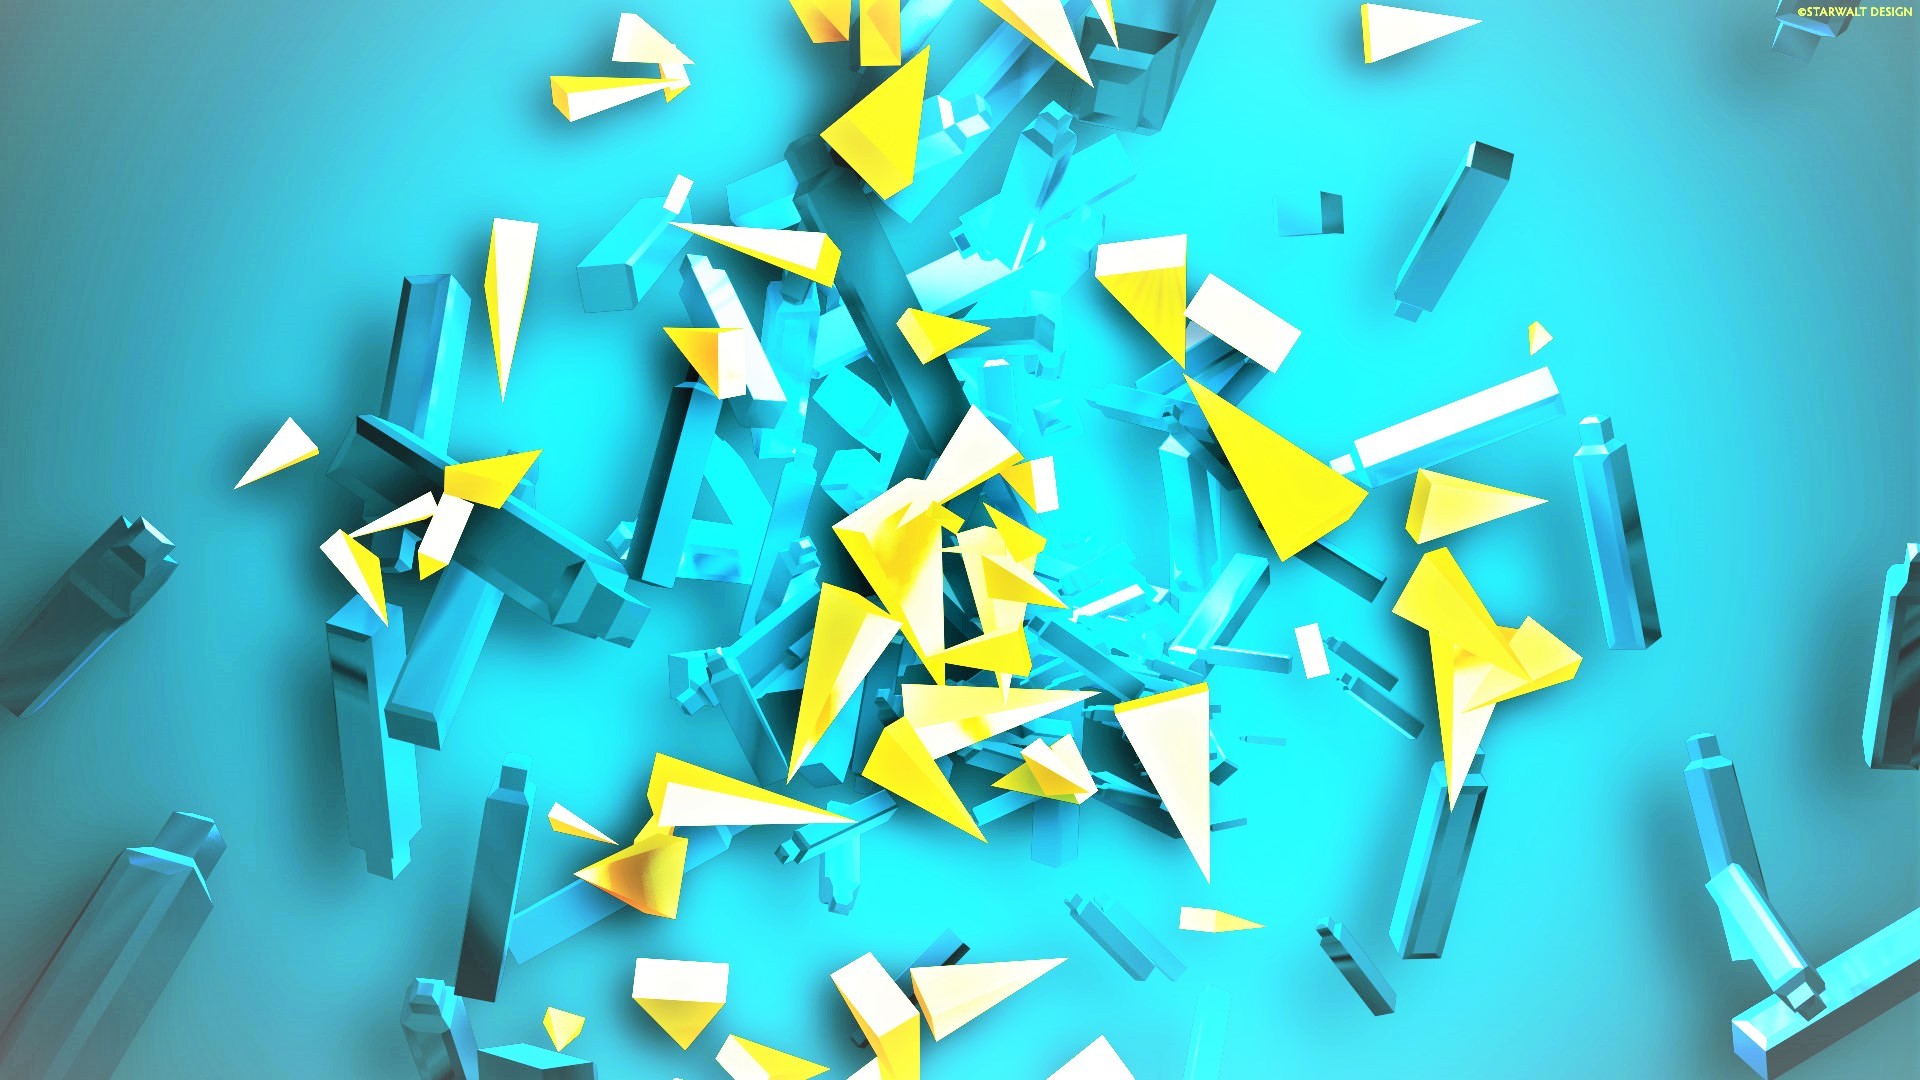 Abstract Blue Yellow Shards 3D Colorful Cyan 1920x1080